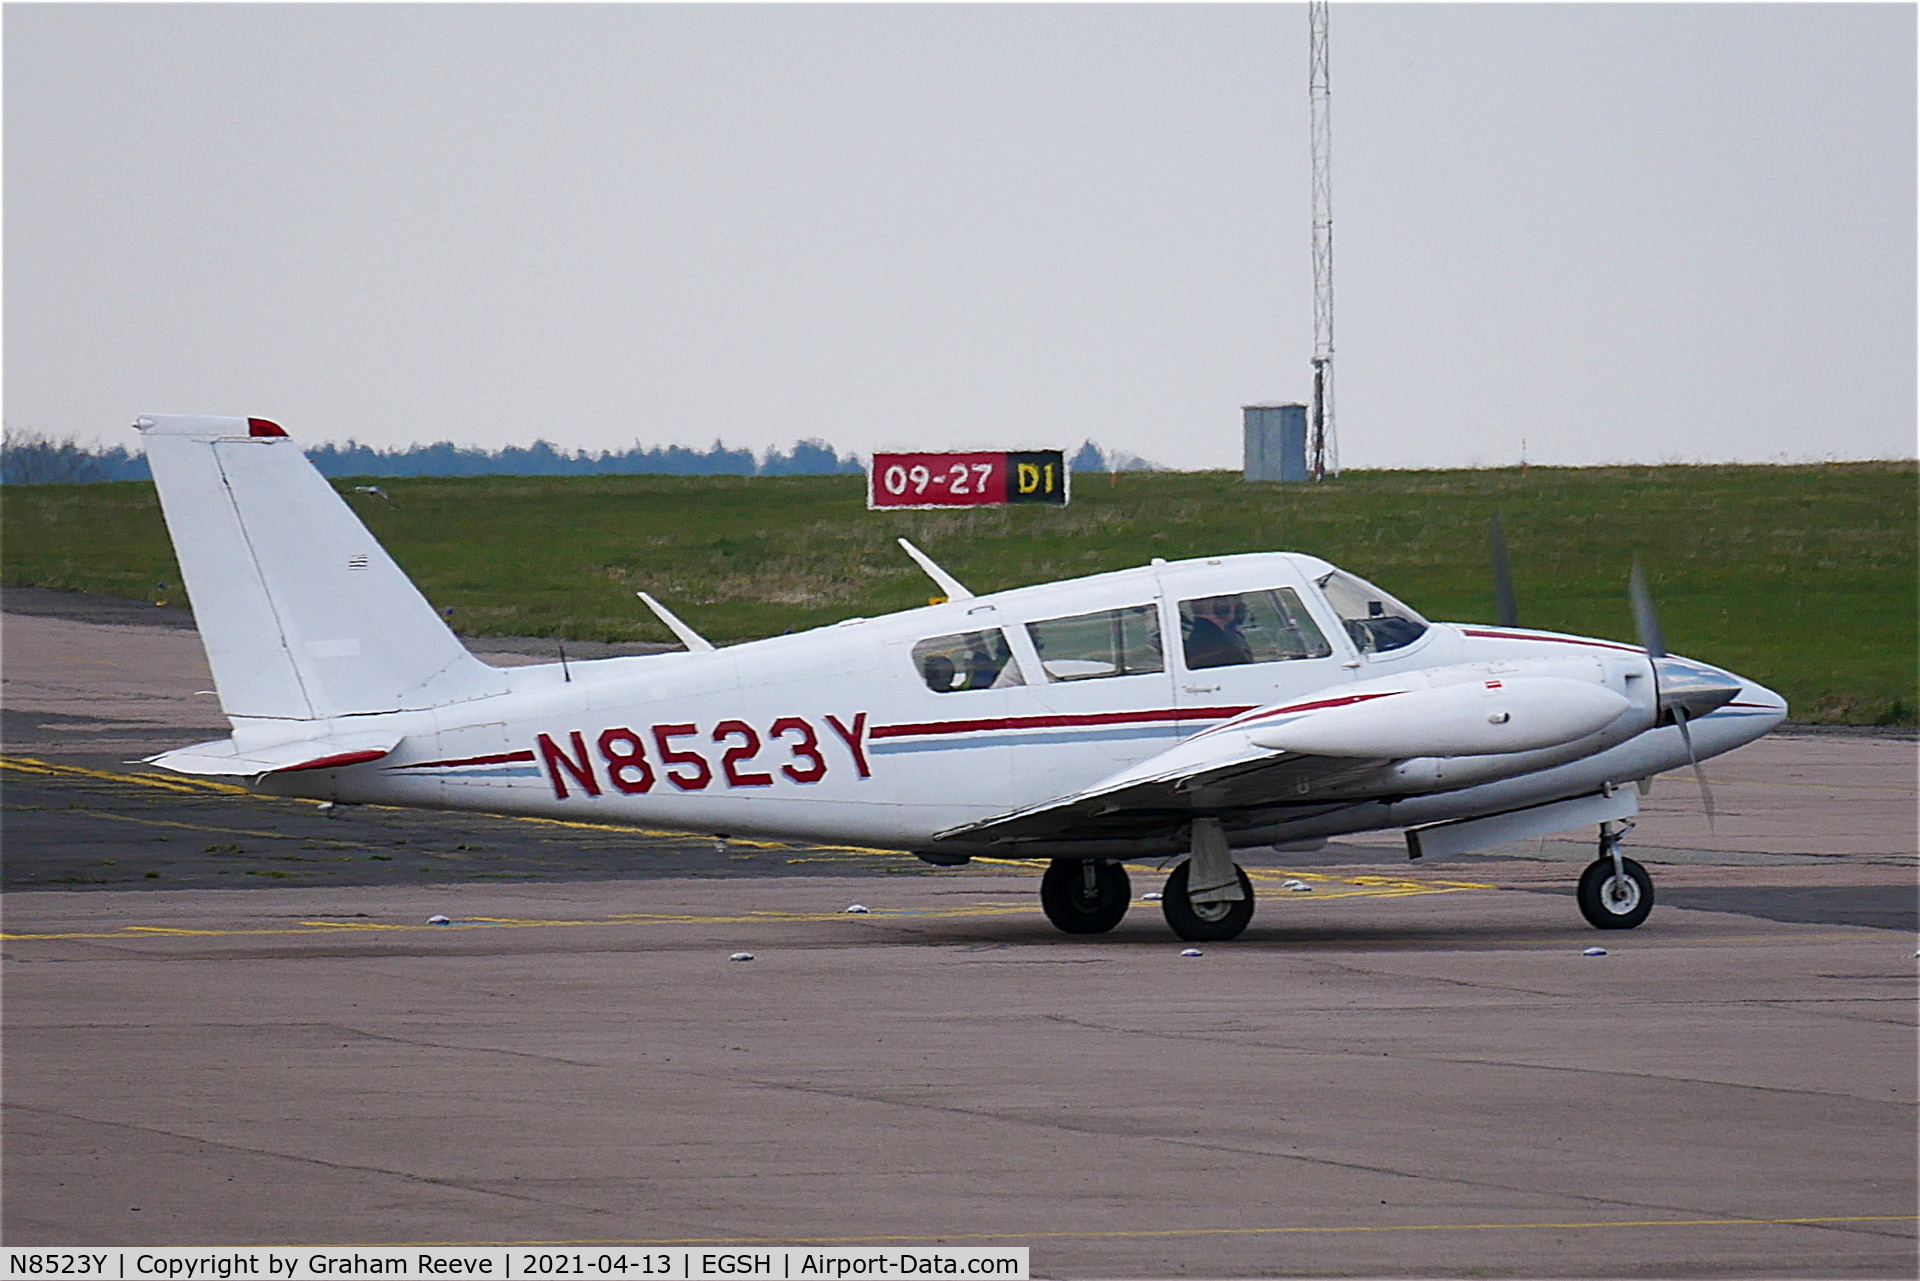 N8523Y, 1968 Piper PA-30-160 Twin Comanche Twin Comanche C/N 30-1684, Departing from Norwich.